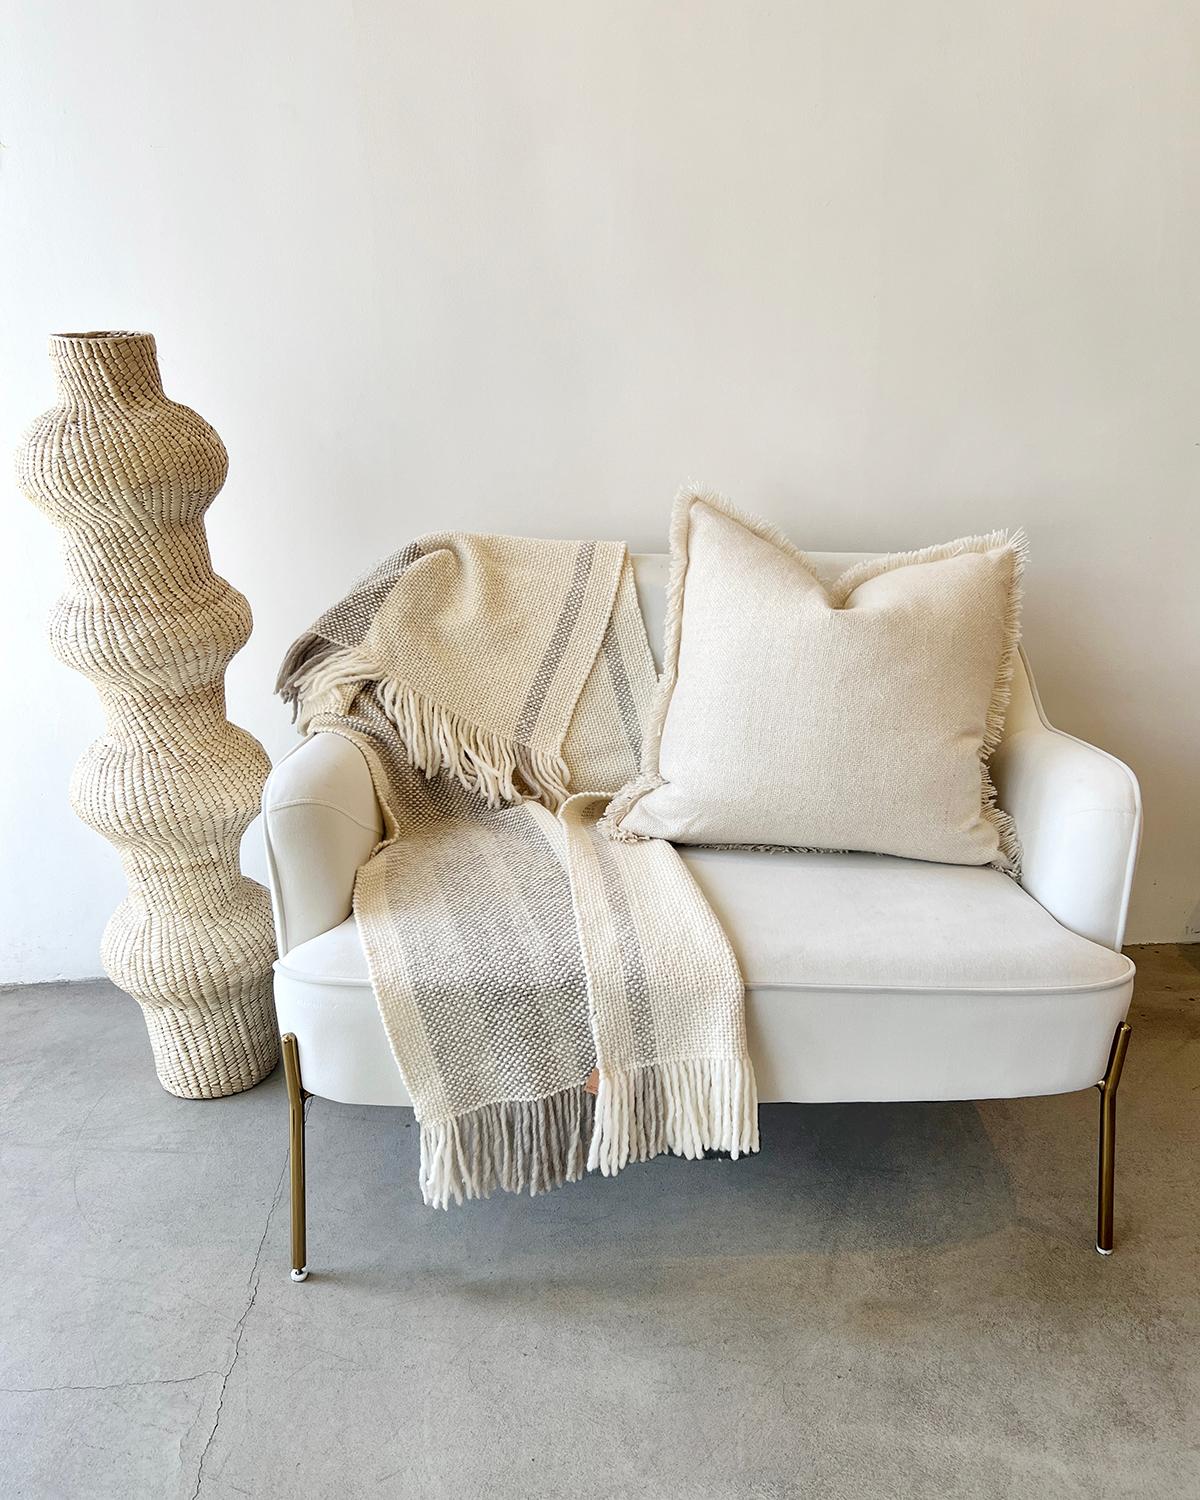 This lovely cream open weave handwoven throw pillow is made from hand spun virgin llama wool, woven by hand by master weavers who live in the remote area of La Puna, Argentina, using ancestral techniques. The entire process from shearing to final